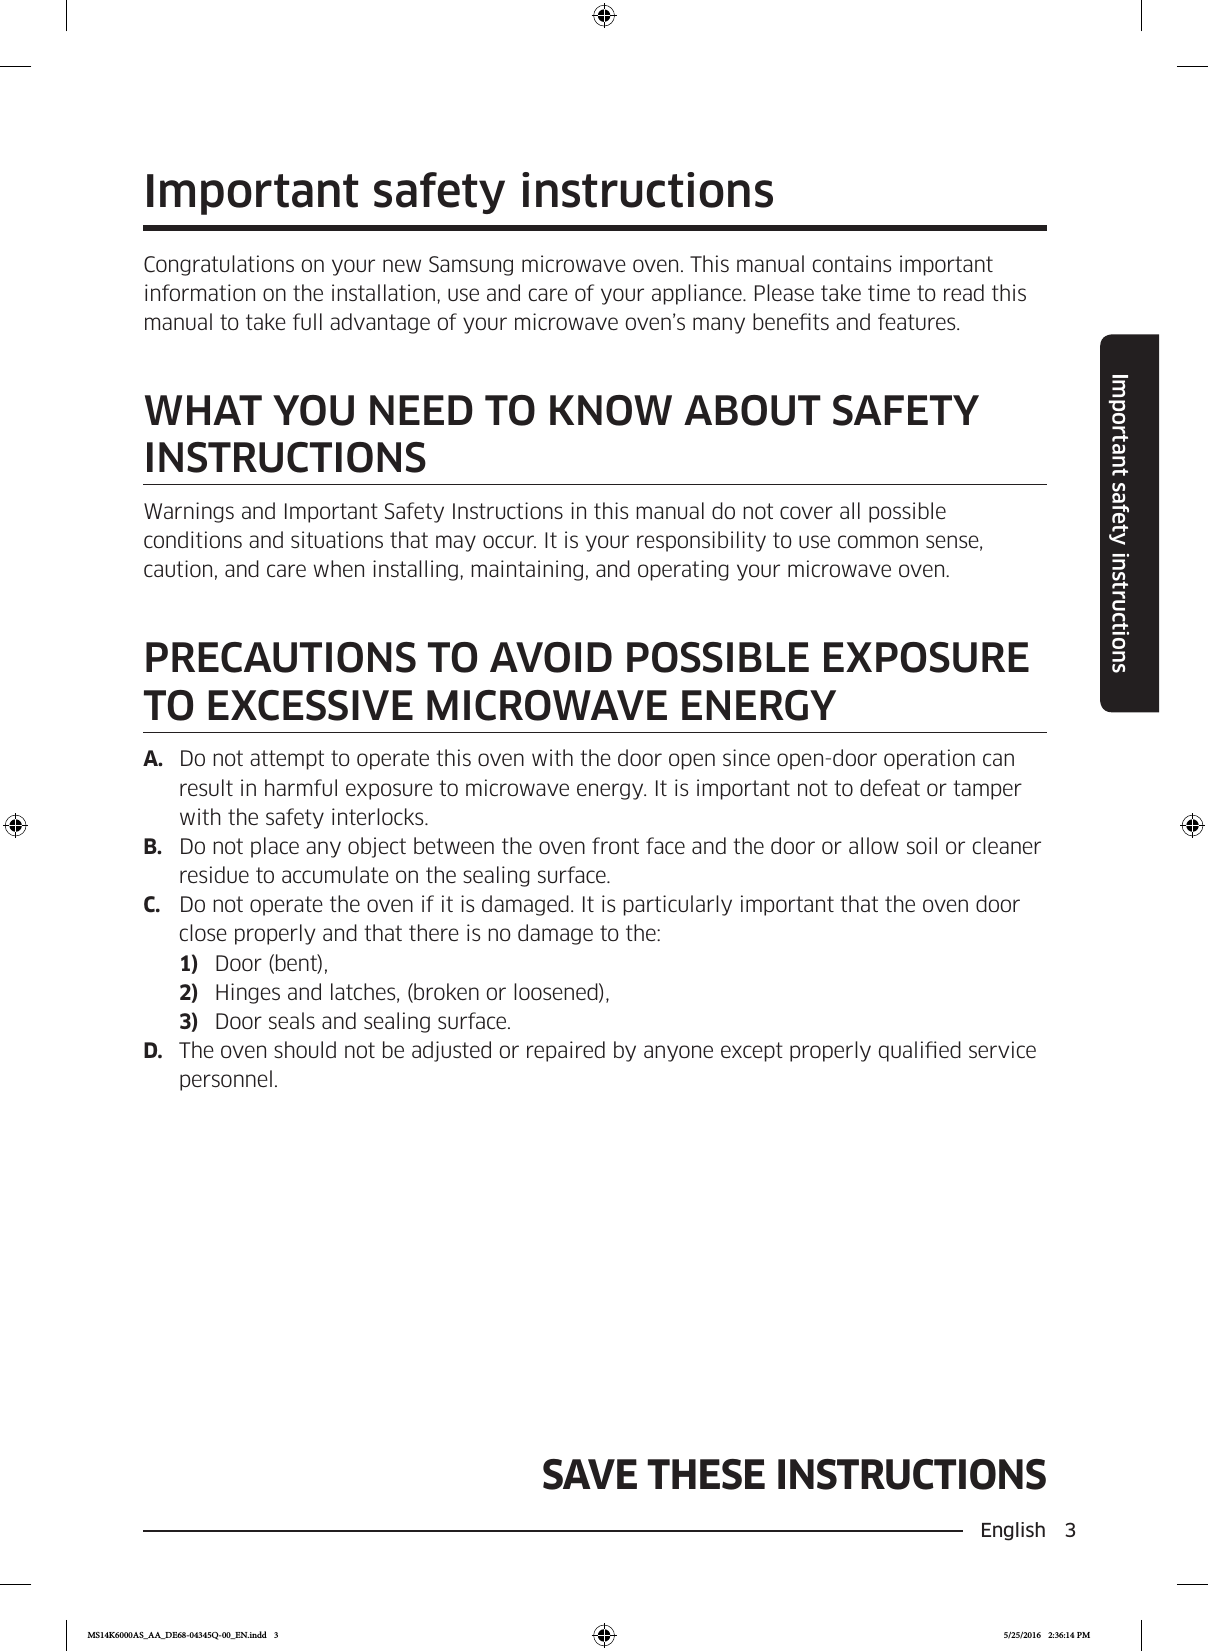 English  3Important safety instructionsSAVE THESE INSTRUCTIONSImportant safety instructionsCongratulations on your new Samsung microwave oven. This manual contains important information on the installation, use and care of your appliance. Please take time to read this manual to take full advantage of your microwave oven’s many benets and features.WHAT YOU NEED TO KNOW ABOUT SAFETY INSTRUCTIONSWarnings and Important Safety Instructions in this manual do not cover all possible conditions and situations that may occur. It is your responsibility to use common sense, caution, and care when installing, maintaining, and operating your microwave oven.PRECAUTIONS TO AVOID POSSIBLE EXPOSURE TO EXCESSIVE MICROWAVE ENERGYA.  Do not attempt to operate this oven with the door open since open-door operation can result in harmful exposure to microwave energy. It is important not to defeat or tamper with the safety interlocks.B.  Do not place any object between the oven front face and the door or allow soil or cleaner residue to accumulate on the sealing surface.C.  Do not operate the oven if it is damaged. It is particularly important that the oven door close properly and that there is no damage to the:1)  Door (bent),2)  Hinges and latches, (broken or loosened),3)  Door seals and sealing surface.D.  The oven should not be adjusted or repaired by anyone except properly qualied service personnel.MS14K6000AS_AA_DE68-04345Q-00_EN.indd   3 5/25/2016   2:36:14 PM